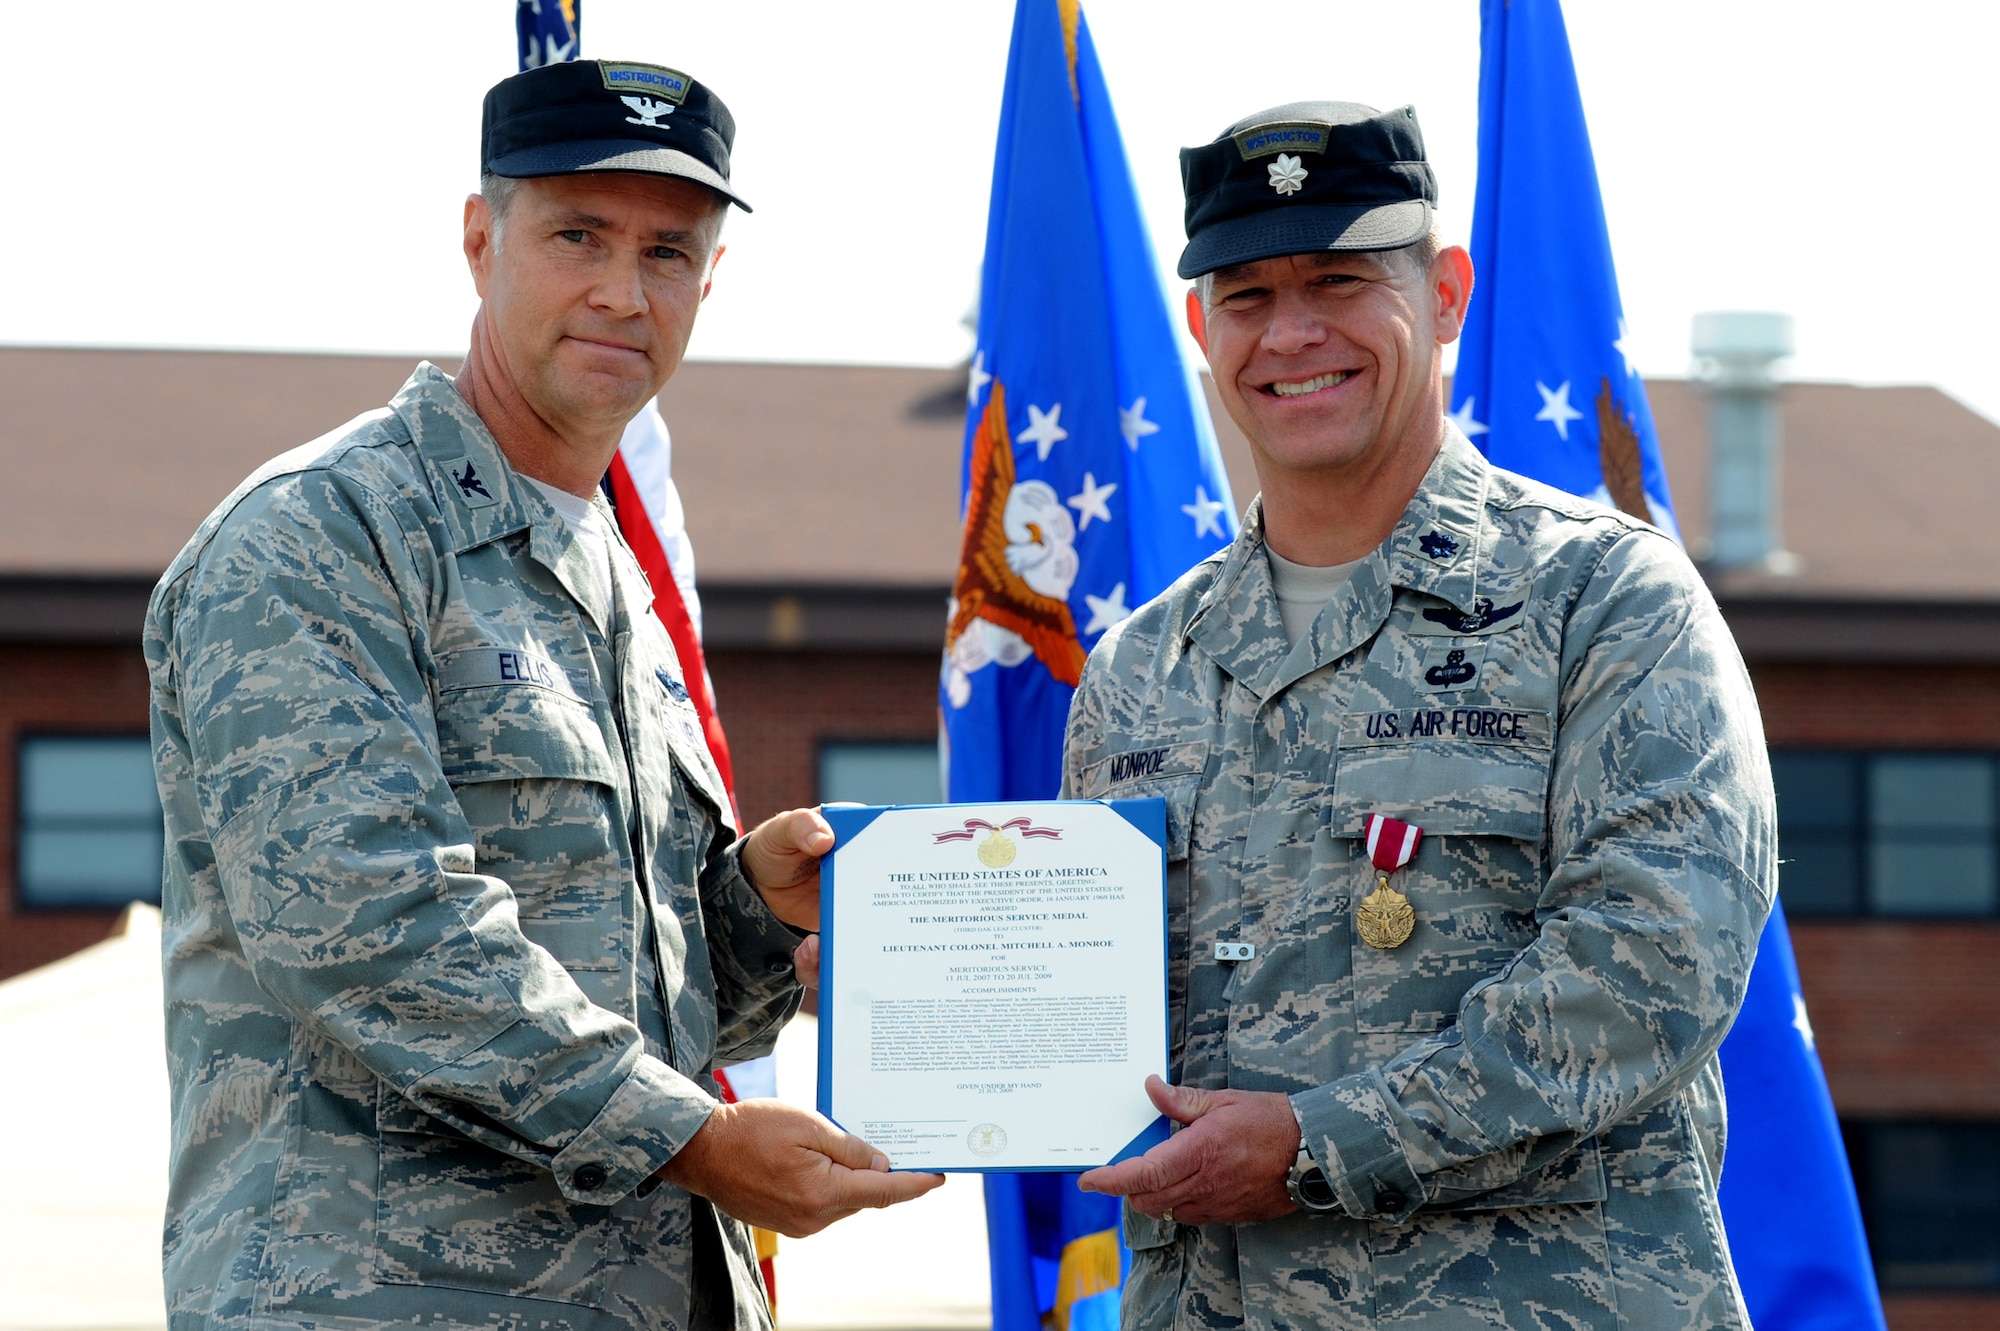 Col. Mark Ellis, Expeditionary Operations School commandant, awards Lt. Col. Mitchell Monroe, 421st Combat Training Squadron commander, with the meritorious service medal July 13 during a change of command ceremony at Joint Base McGuire-Dix-Lakehurst, N.J.  Lt. Col. David Lenderman will assume command of the 421st CTS housed at the U.S. Air Force Expeditionary Center on Fort Dix. (U.S. Air Force Photo/Staff Sgt. Nathan G. Bevier) 